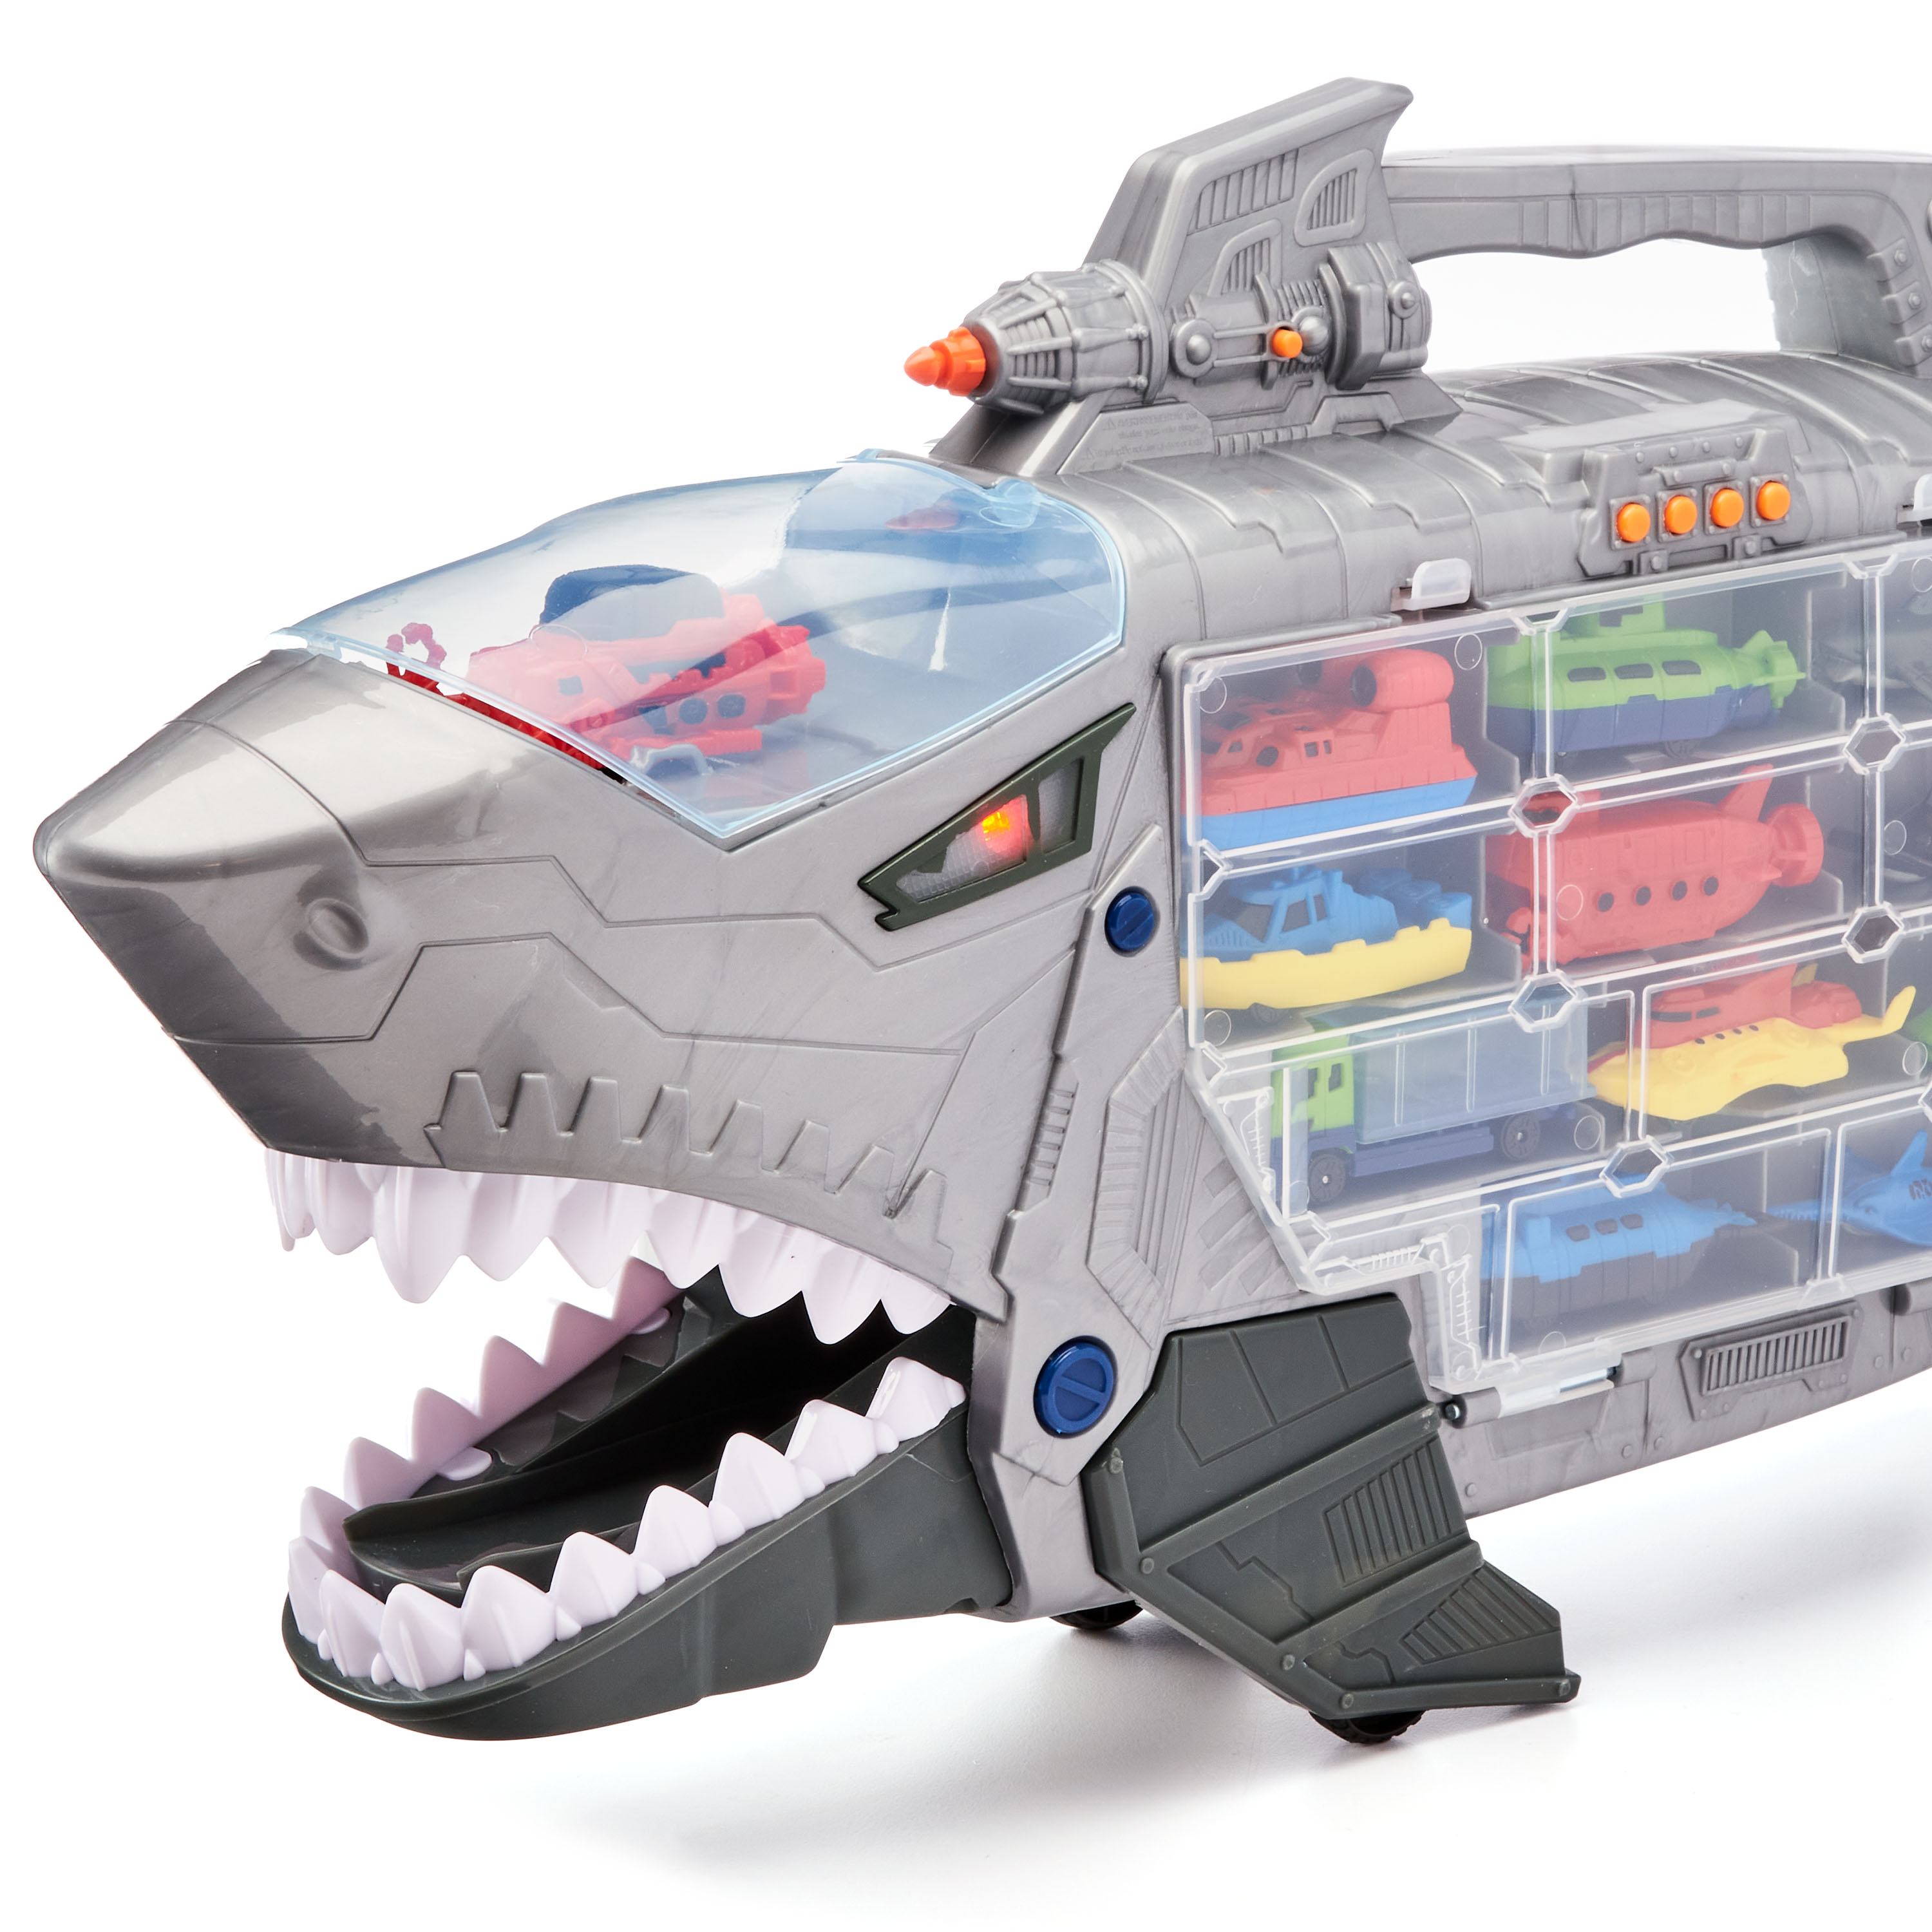 Kid Connection Shark Figure and Vehicle Transporter Play Set, 18 Pieces - image 3 of 6